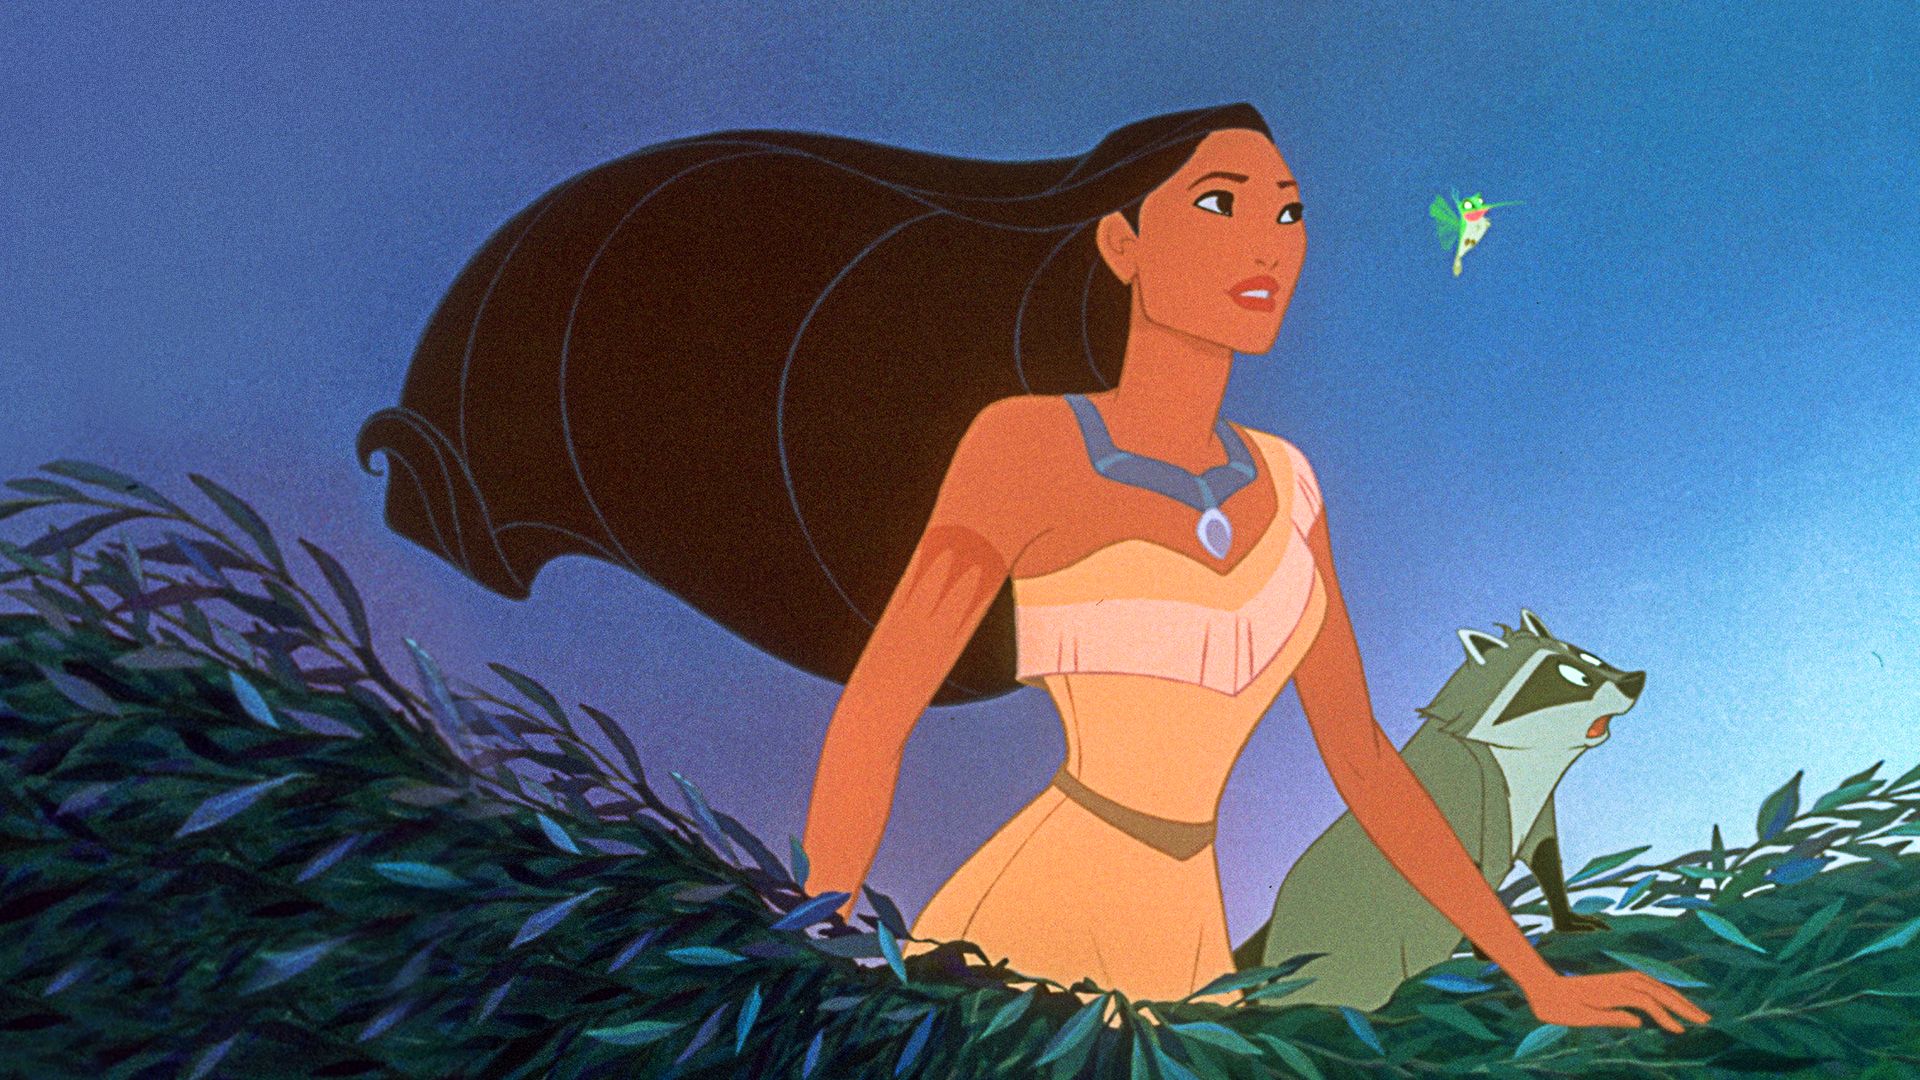 Pocahontas stands near Meeko and Flit as the wind blows through her hair.